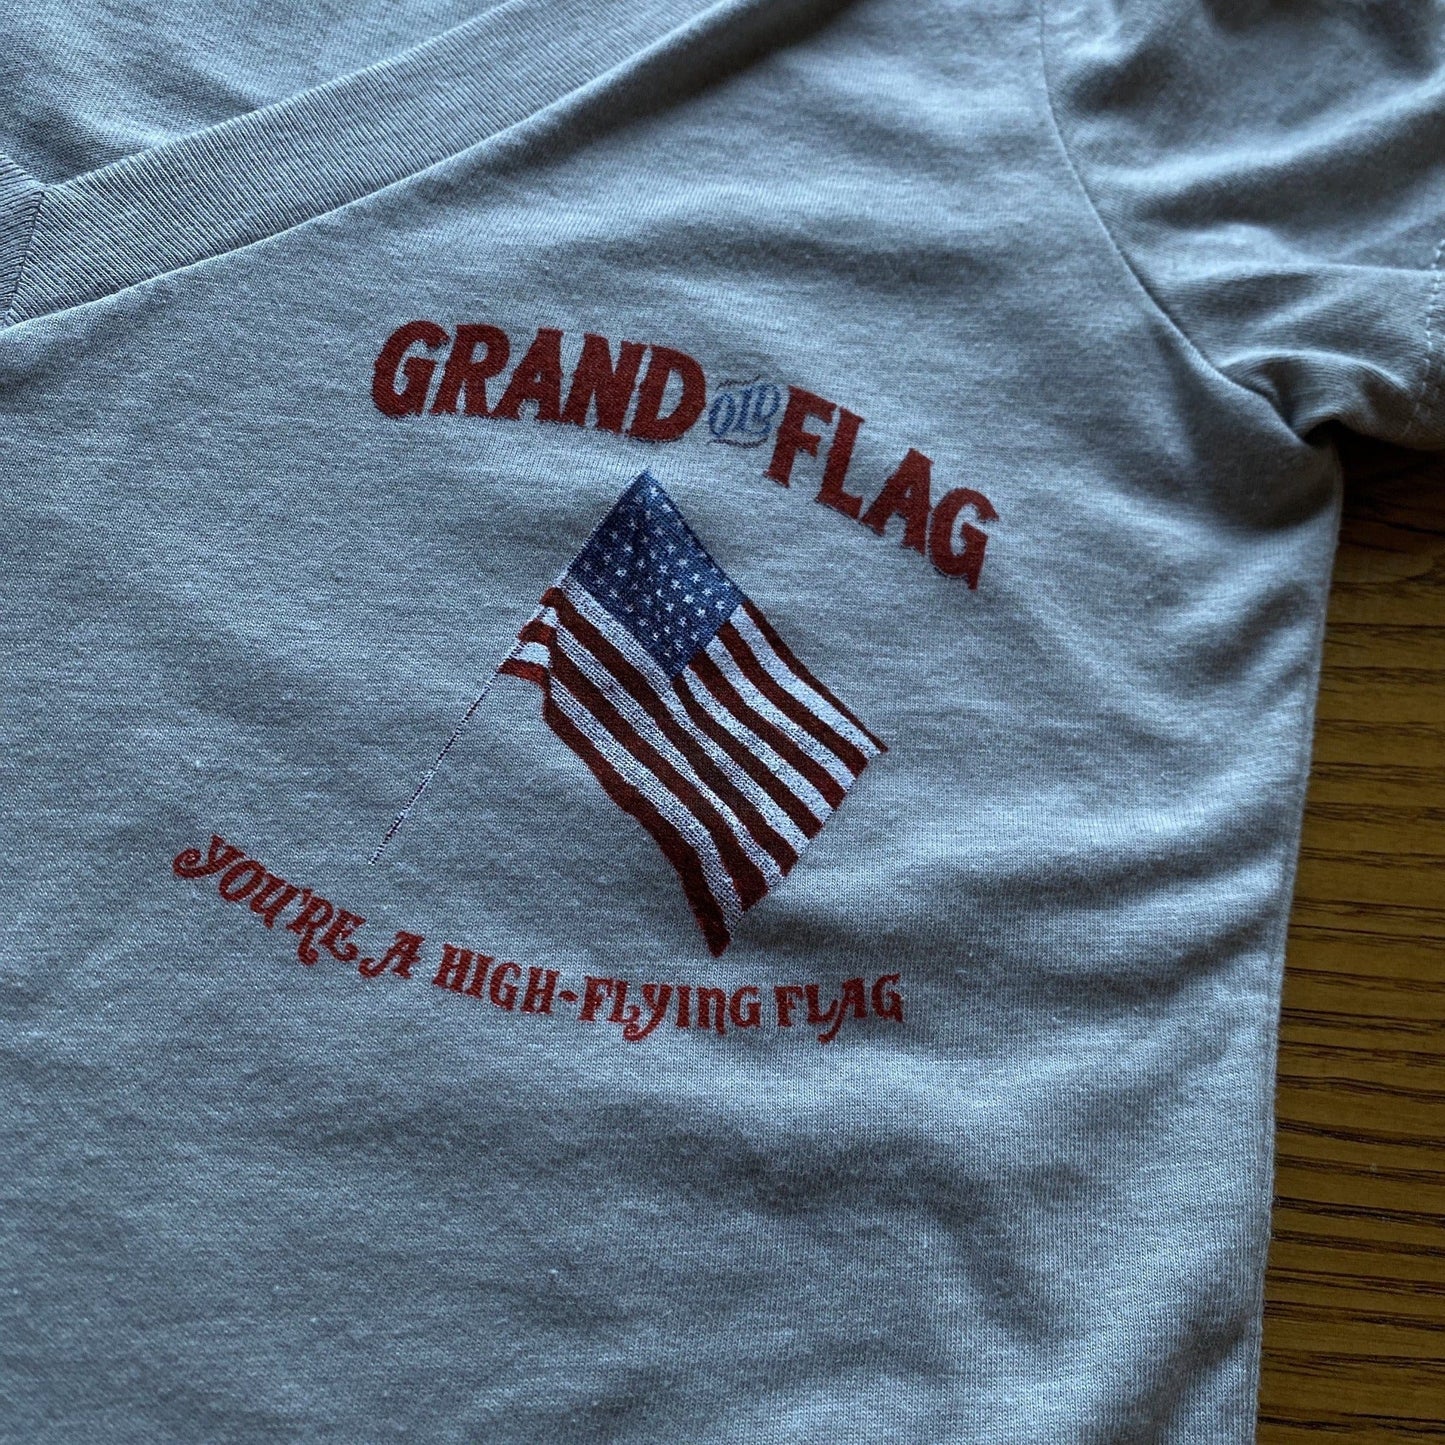 Close-up of "Grand Old Flag" V-neck shirt front design from The History List store